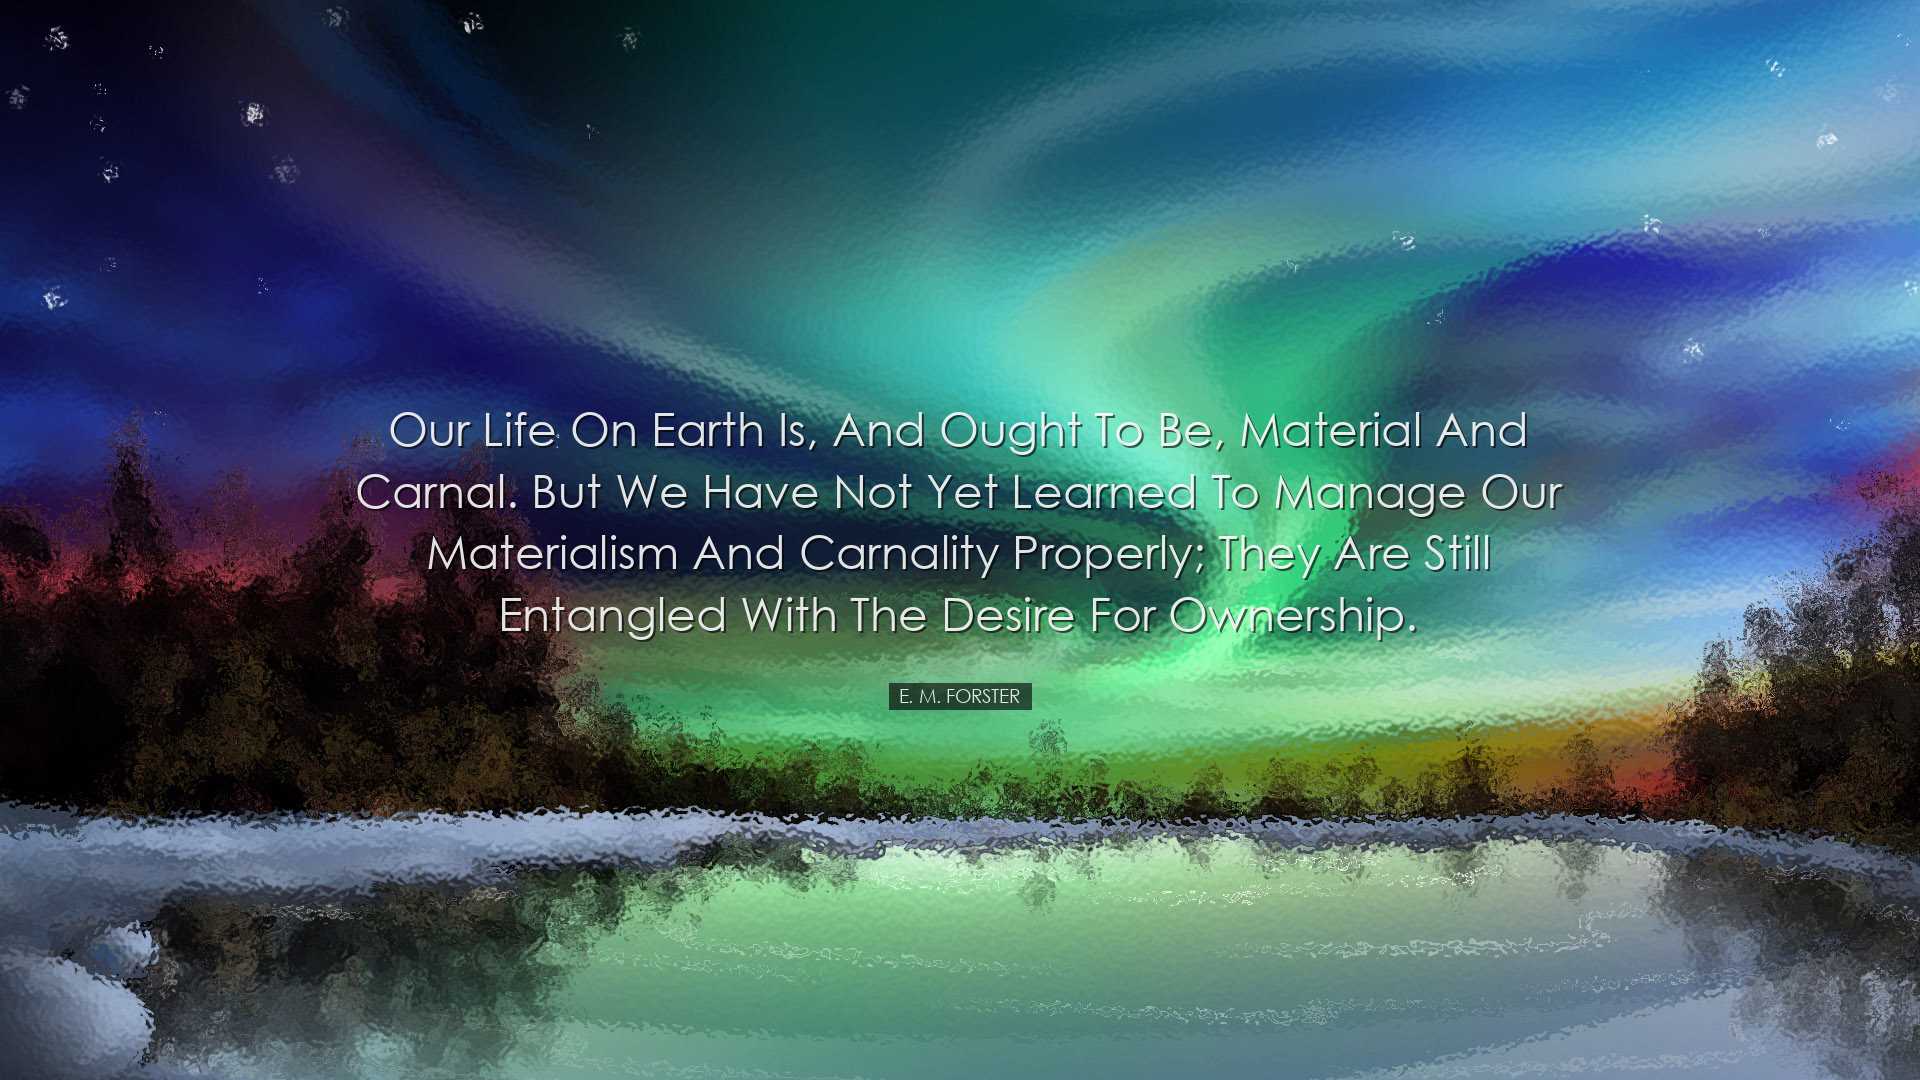 Our life on earth is, and ought to be, material and carnal. But we